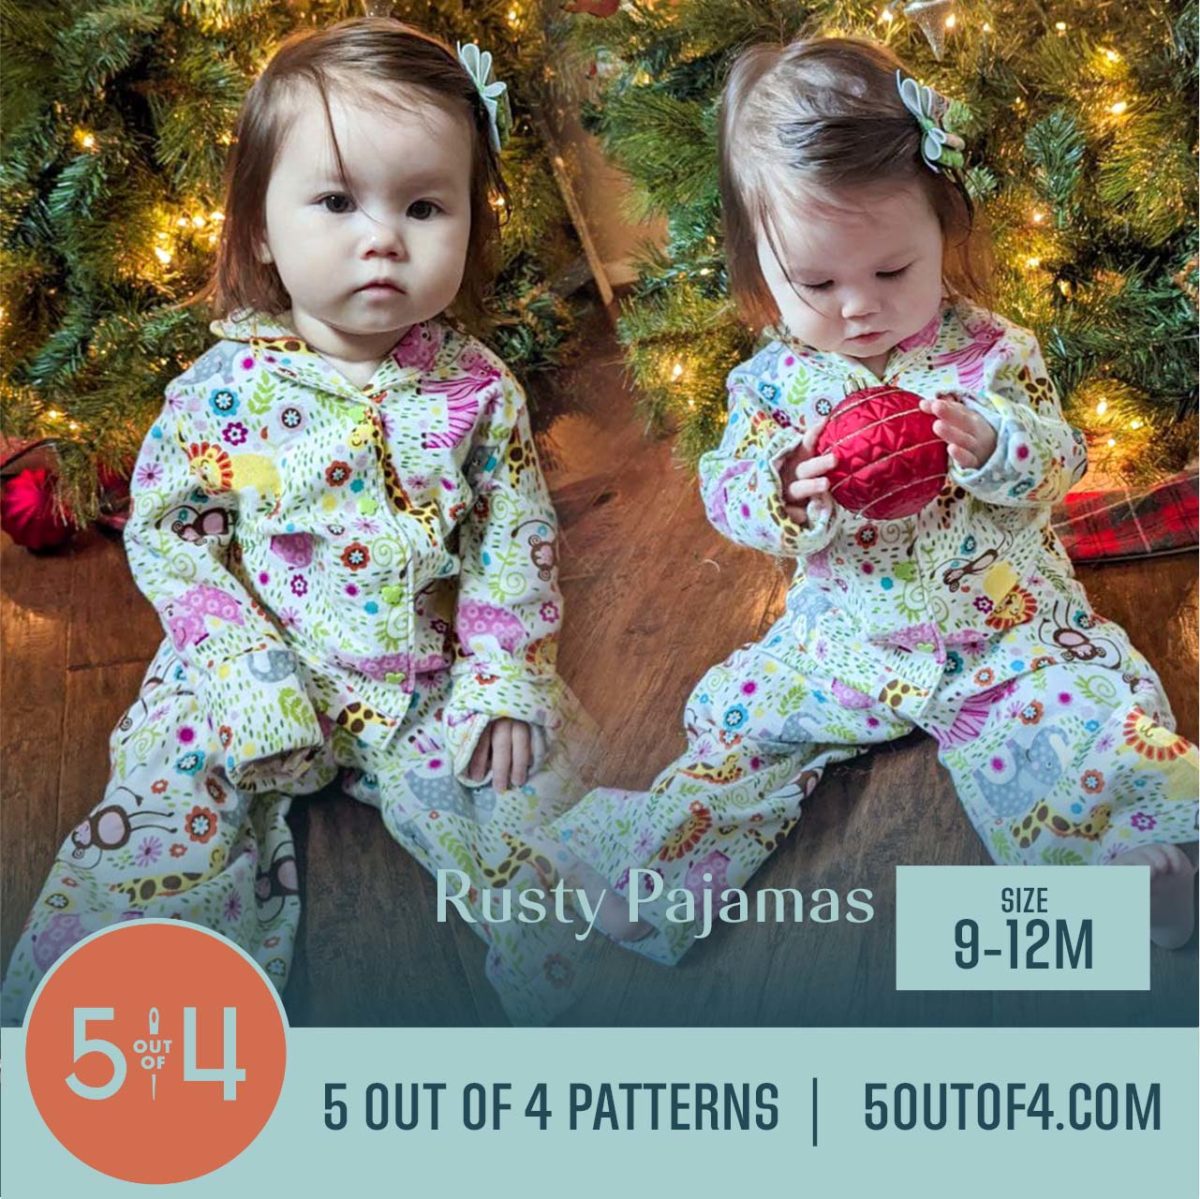 5oo4 Woven Pajama Pattern for Kids size 9 to 12 month